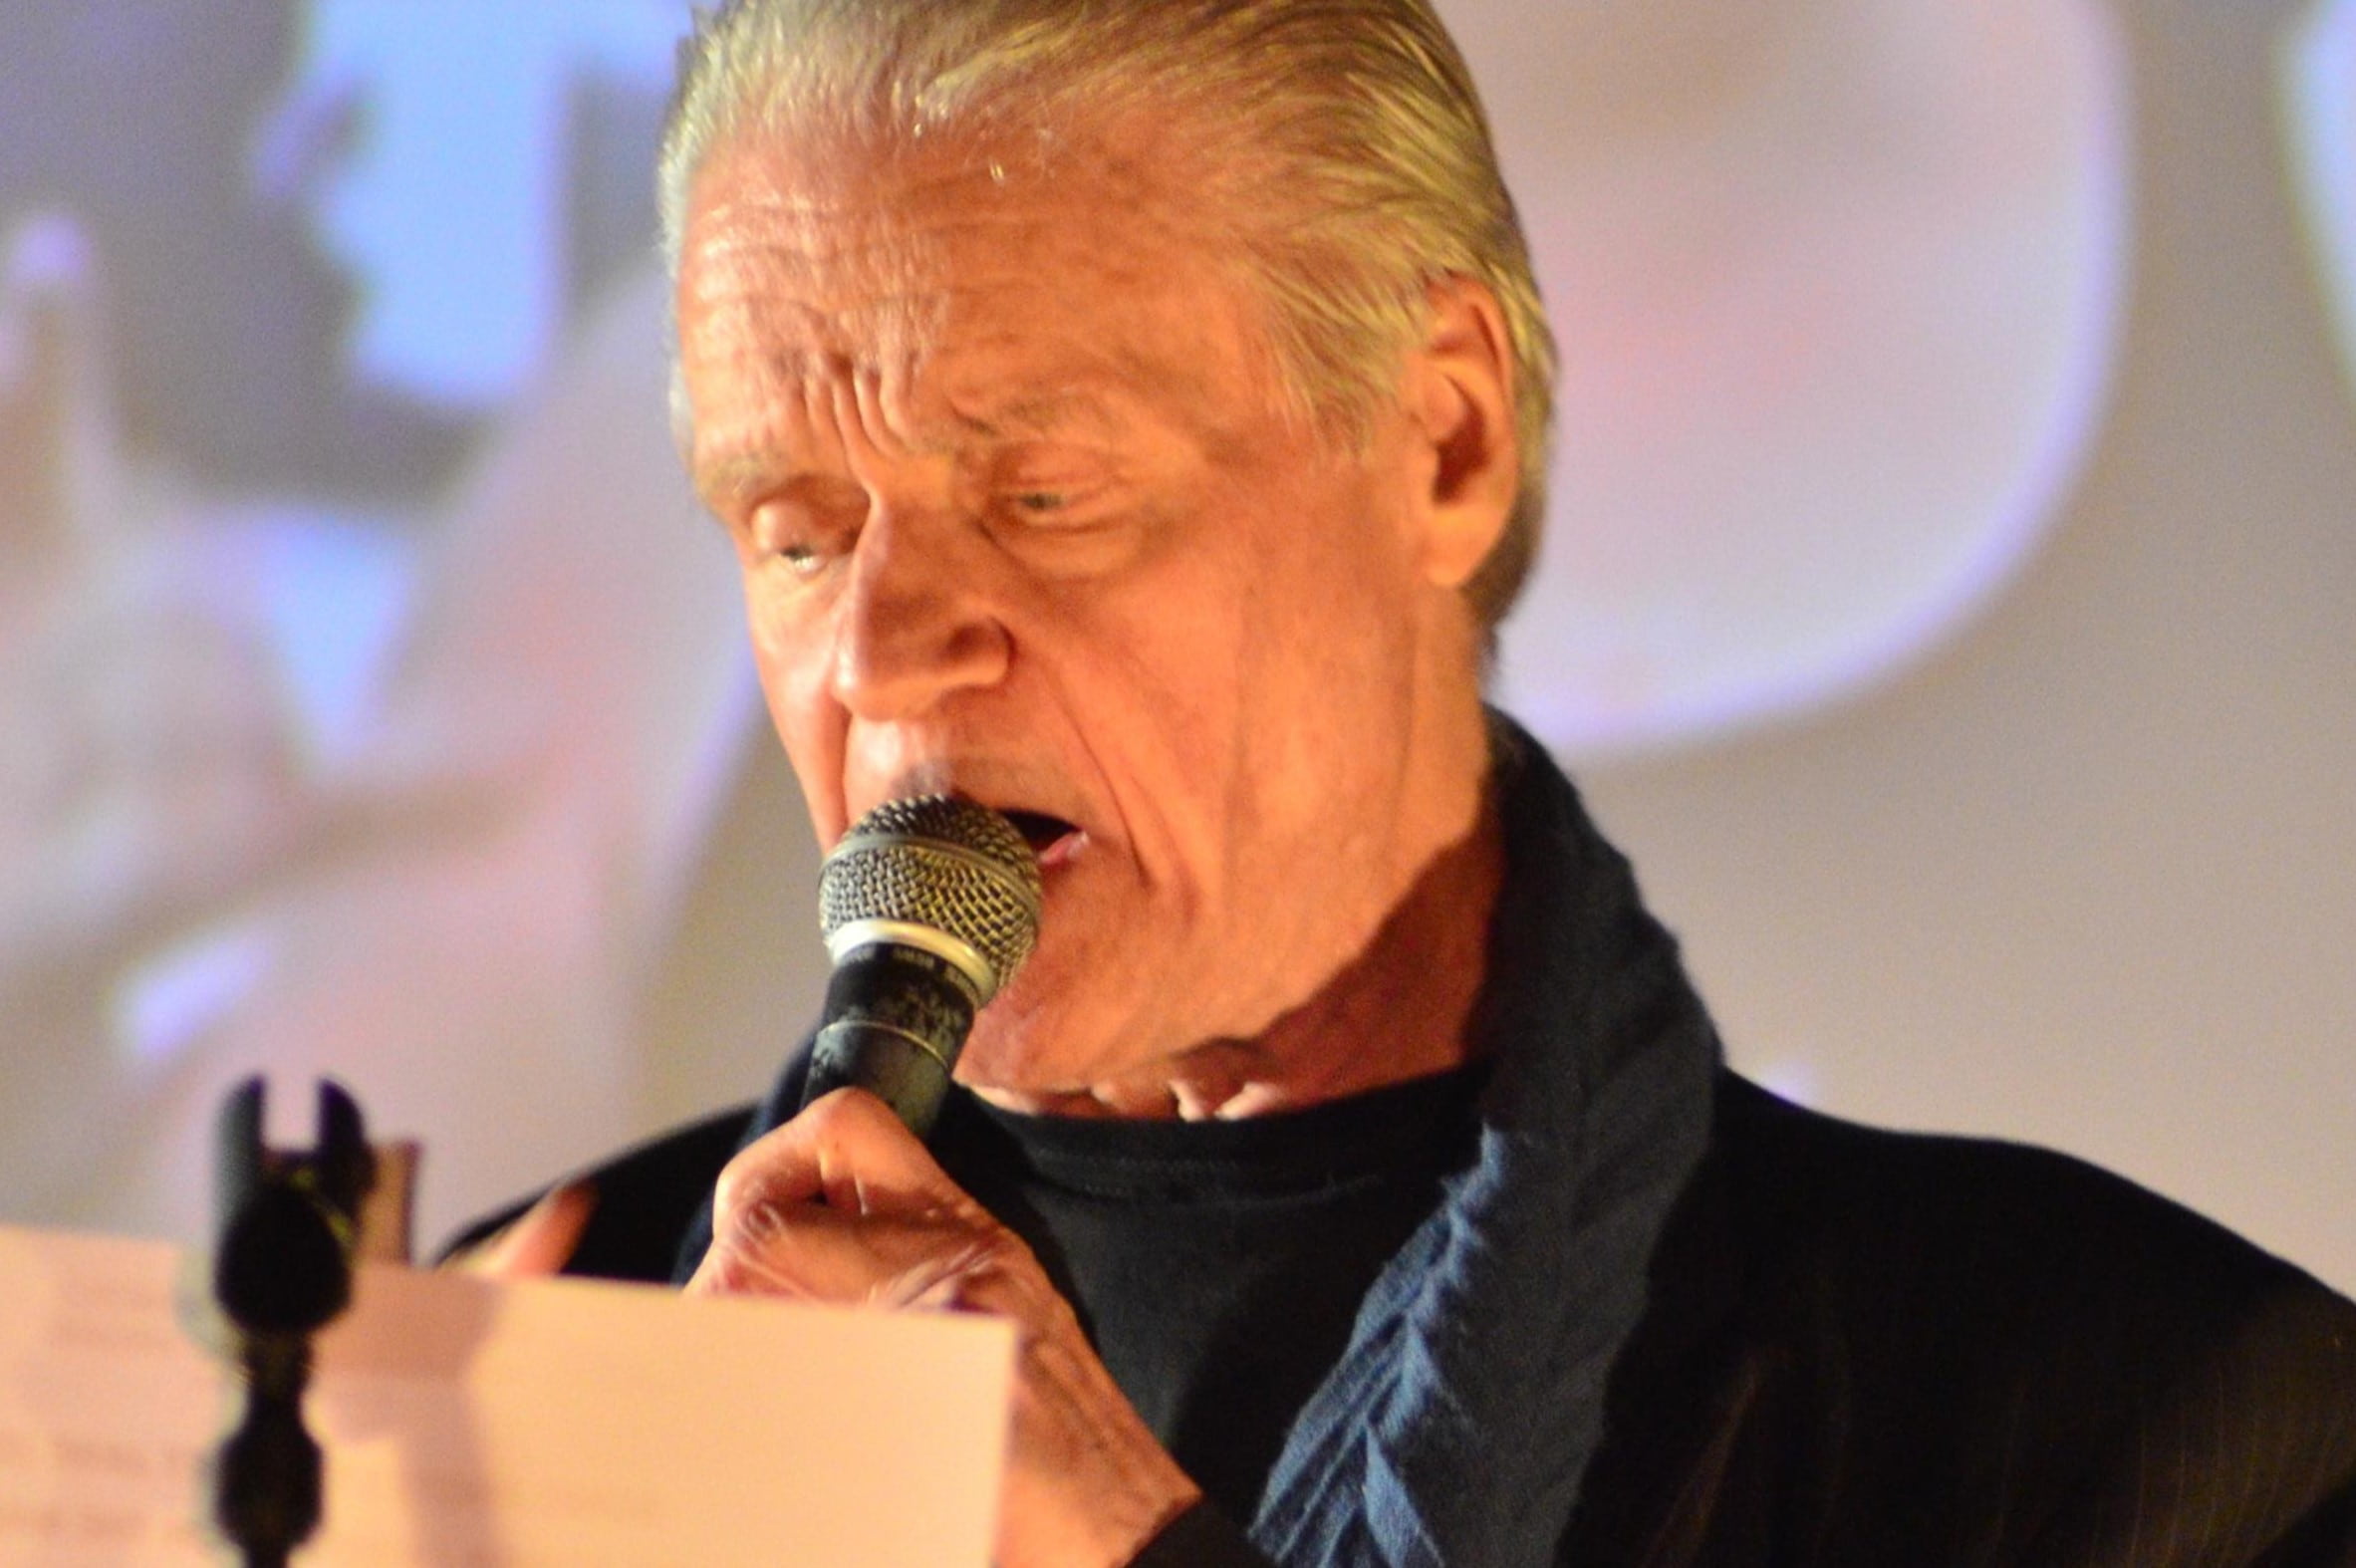 24 Captivating Facts About Kim Fowley - Facts.net